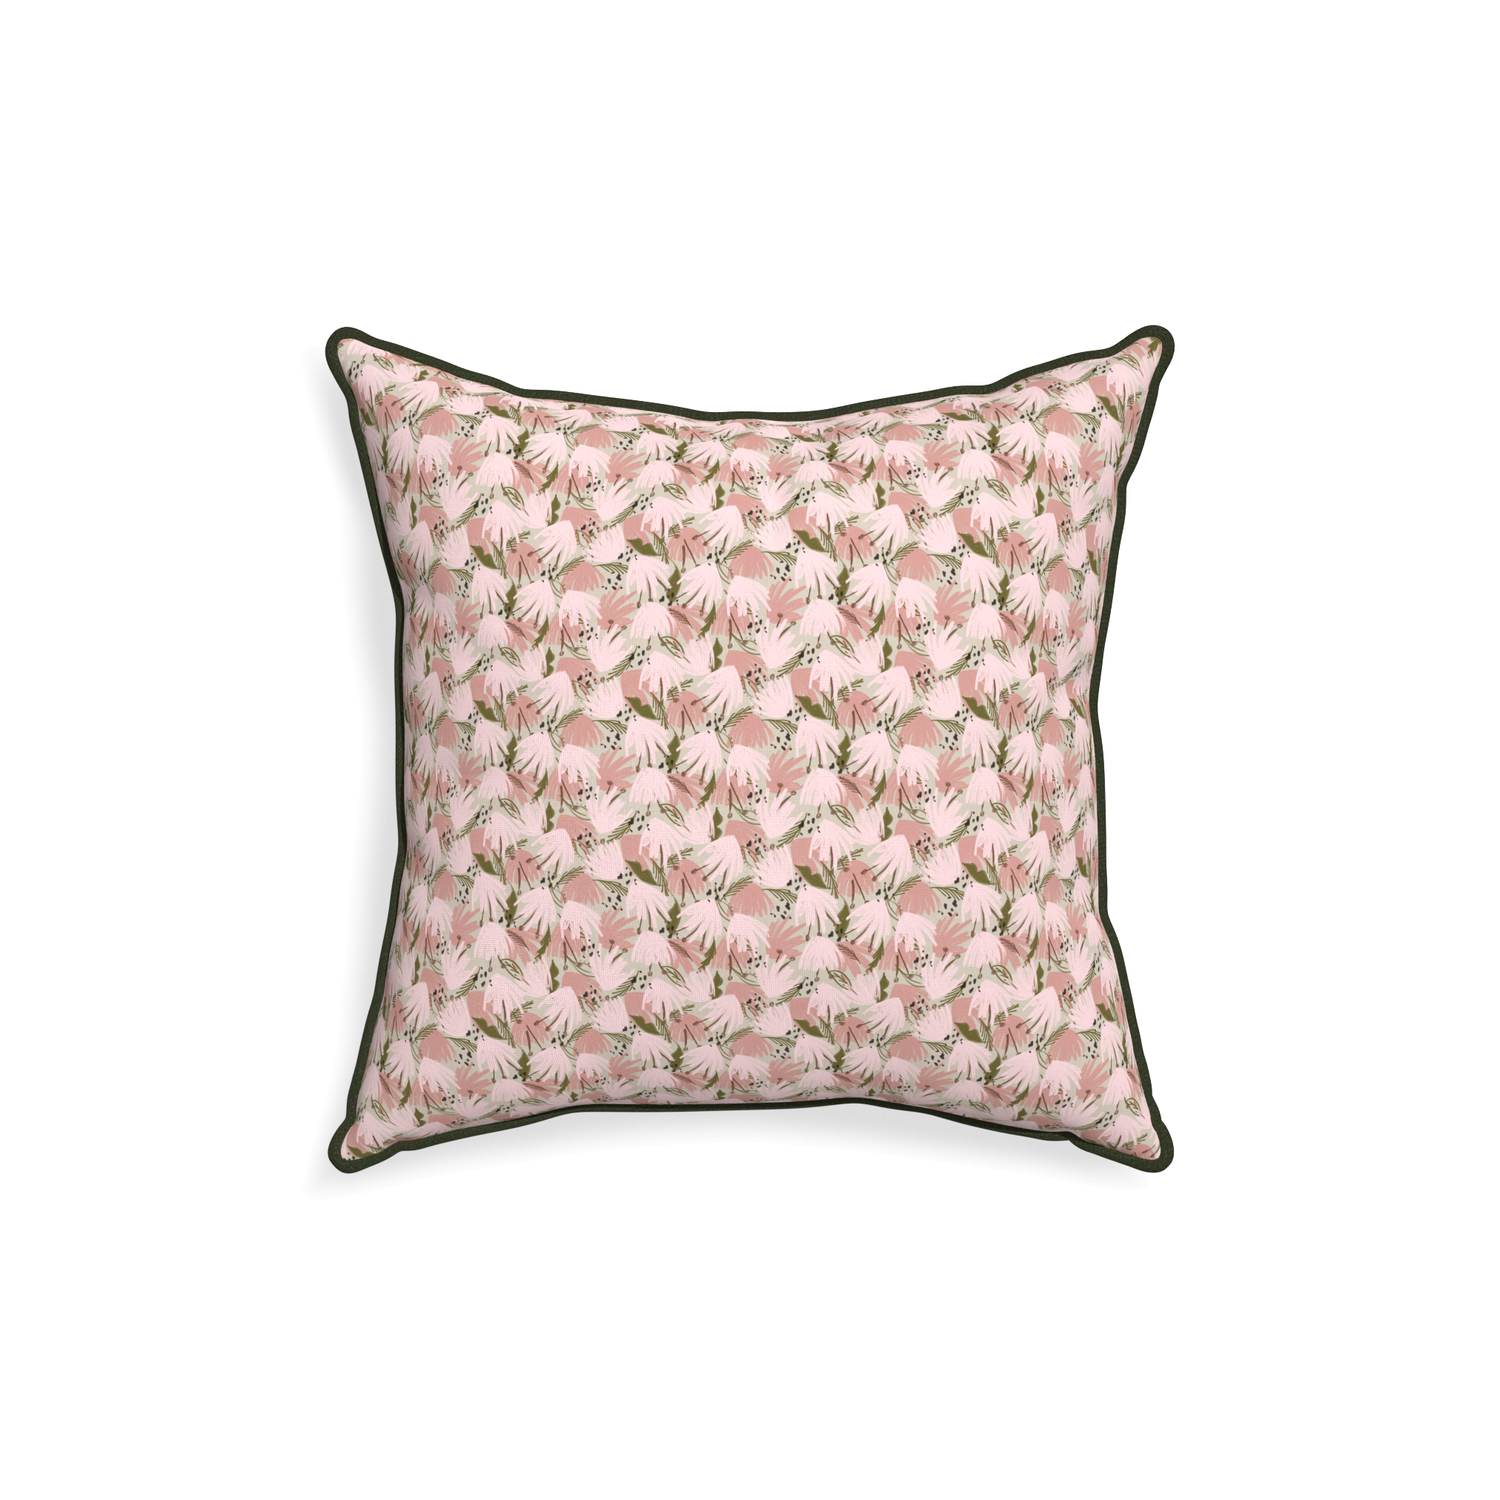 18-square eden pink custom pink floralpillow with f piping on white background